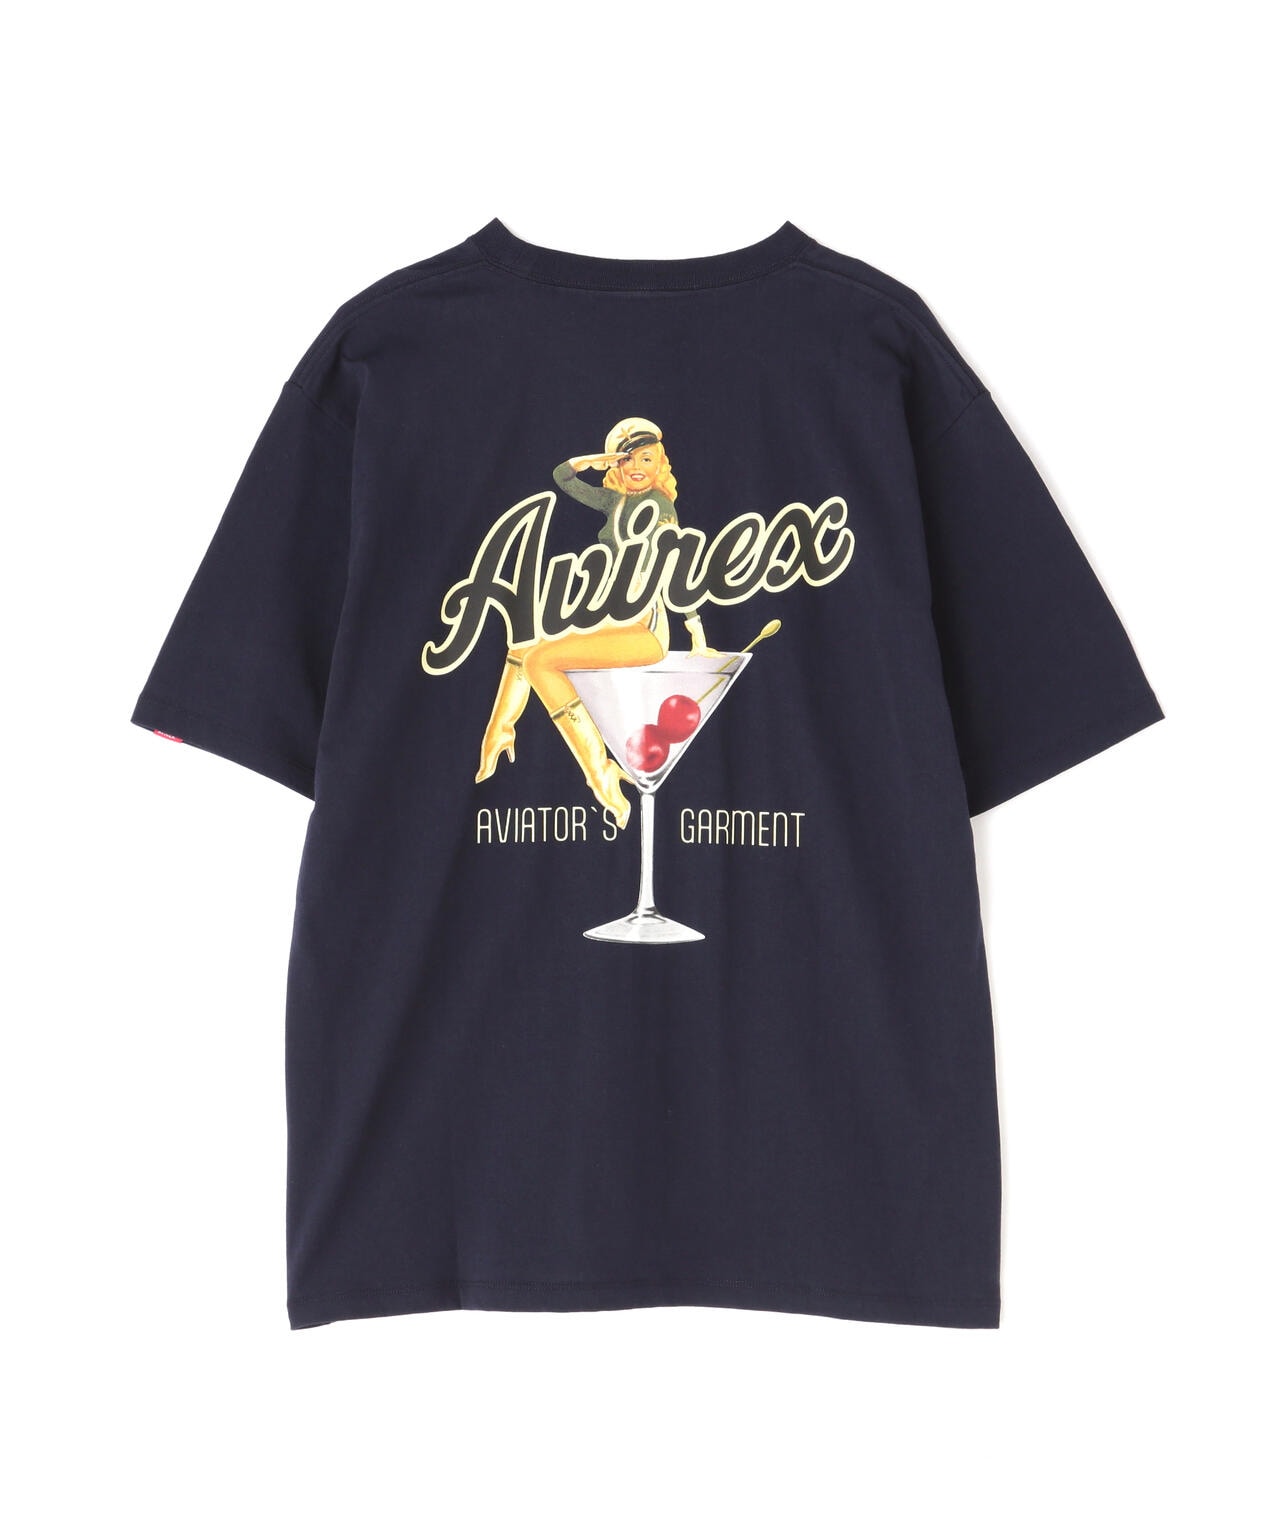 WEB&DEPOT限定》COCKTAIL LOGO PIN-UP SHORT SLEEVE T/Tシャツ 